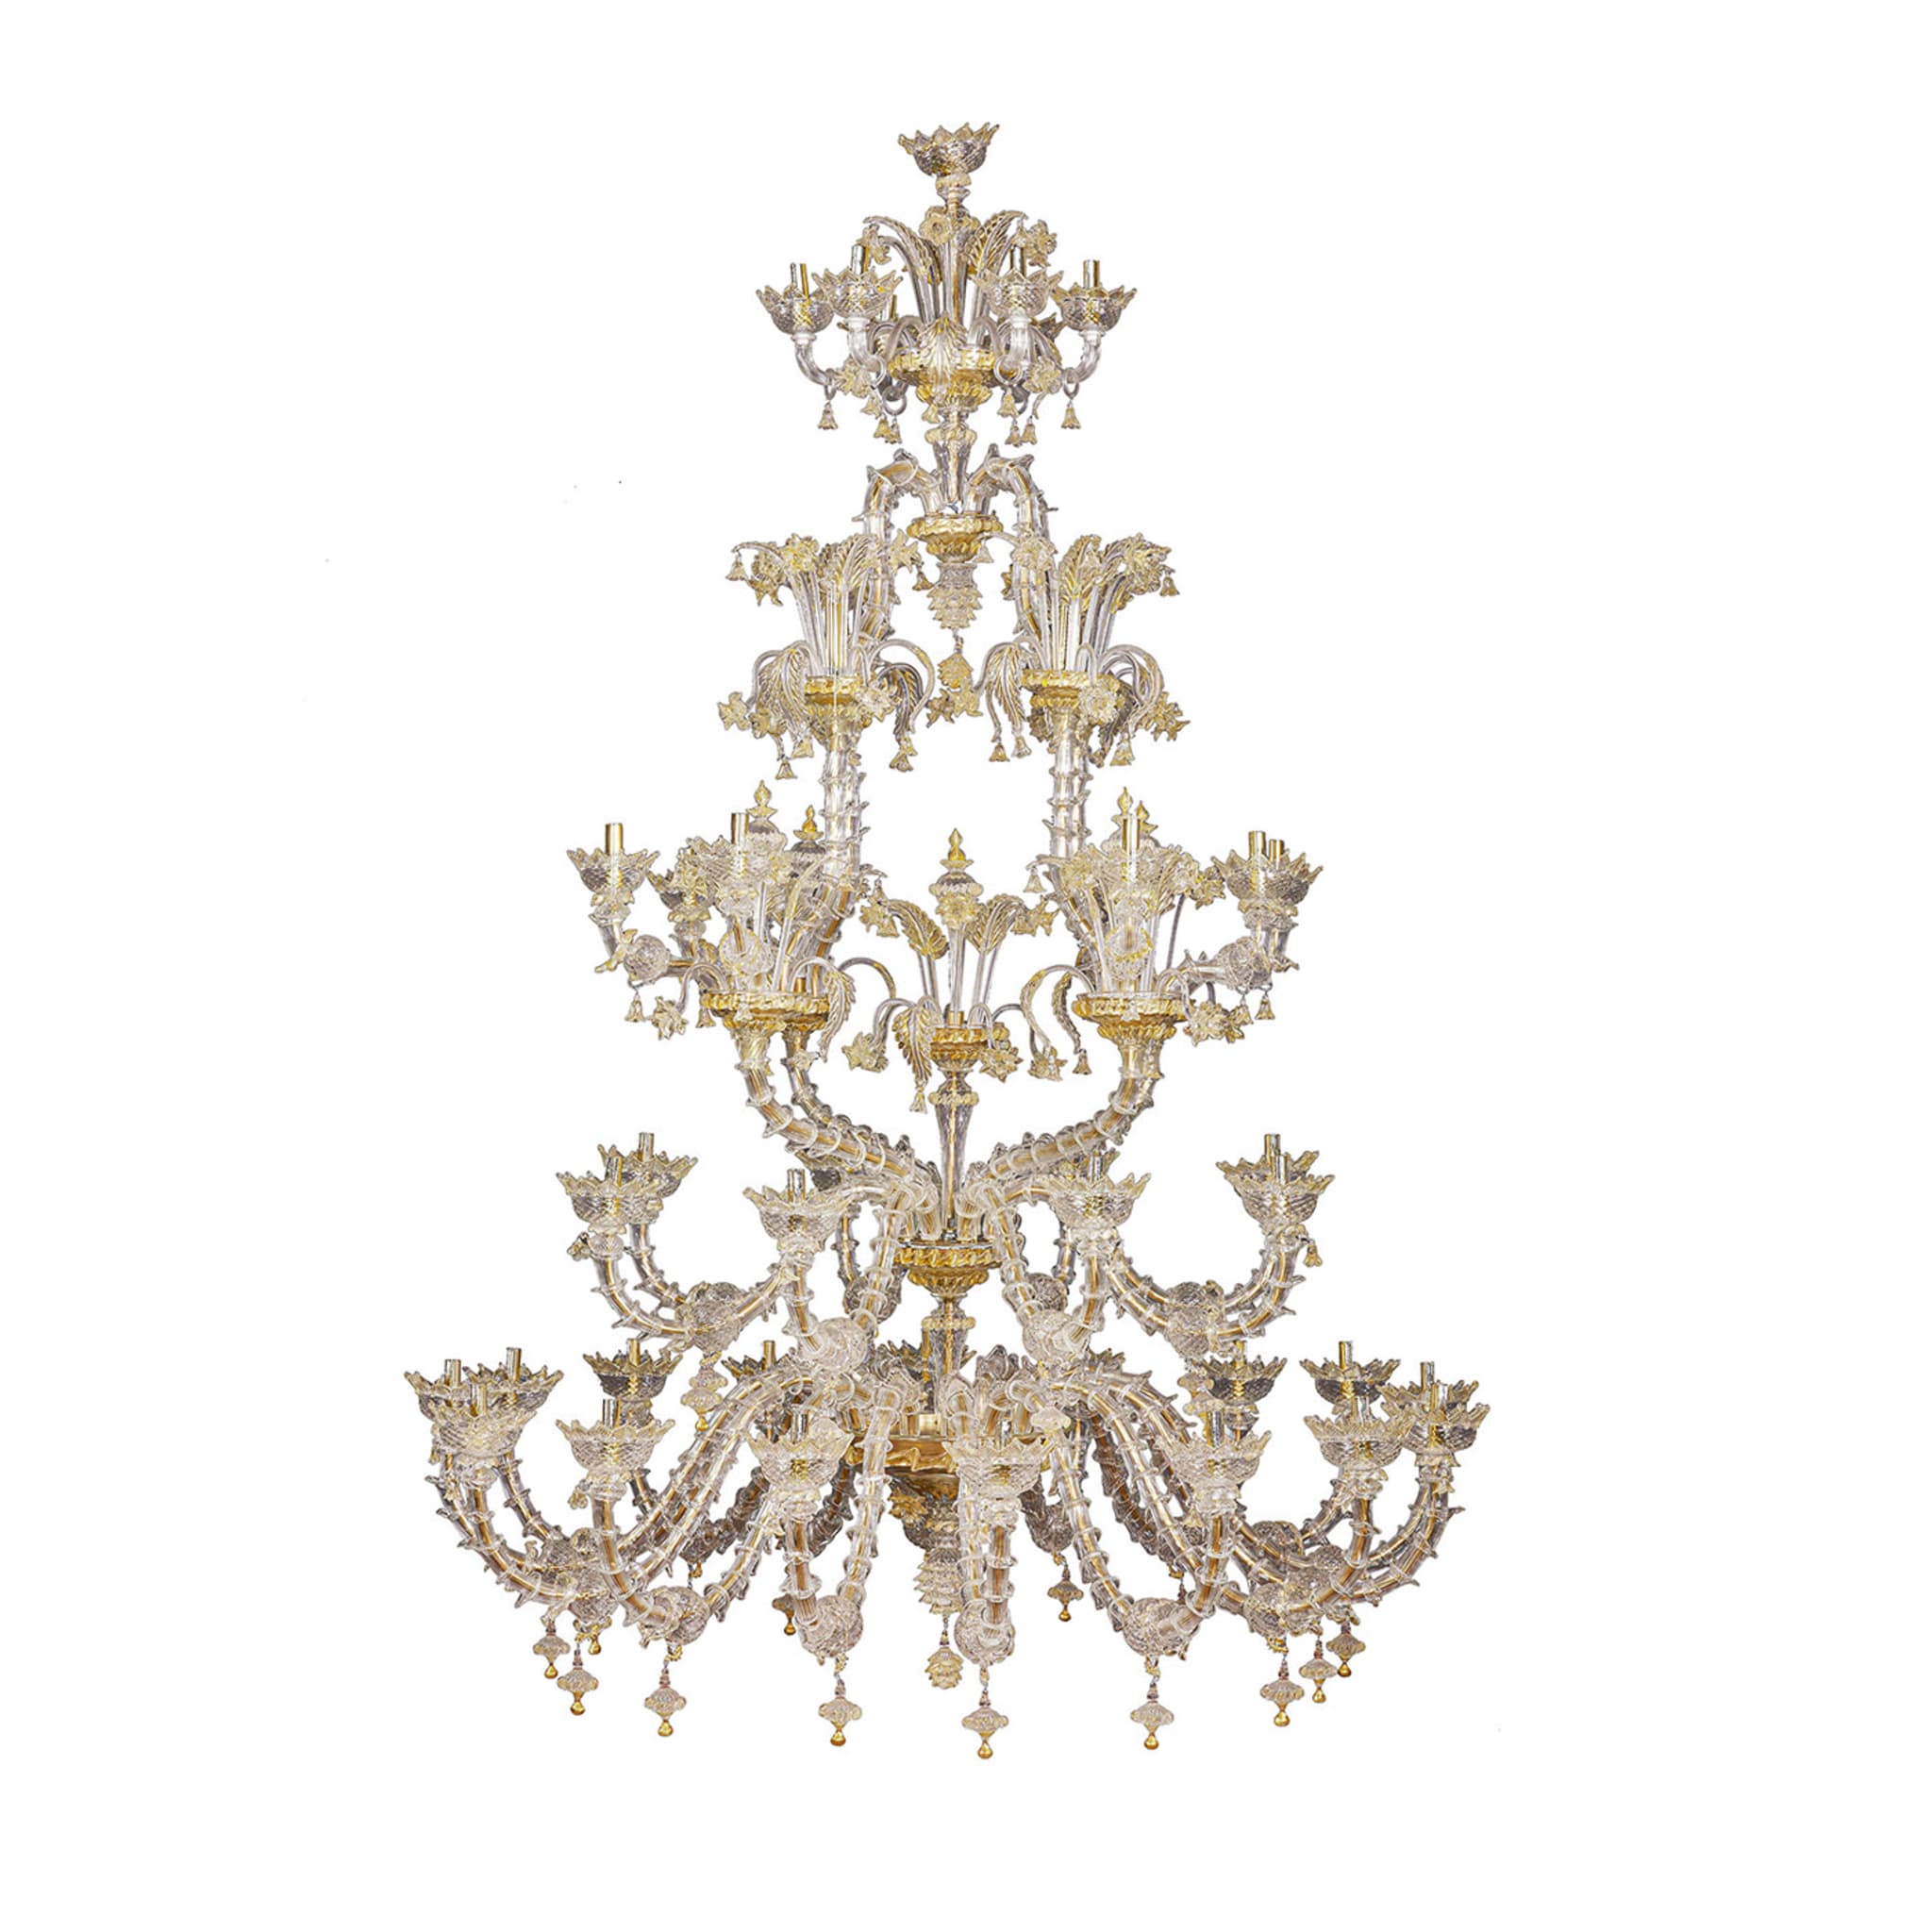 Rezzonico-style Gold and Crystal Chandelier #2 - Main view